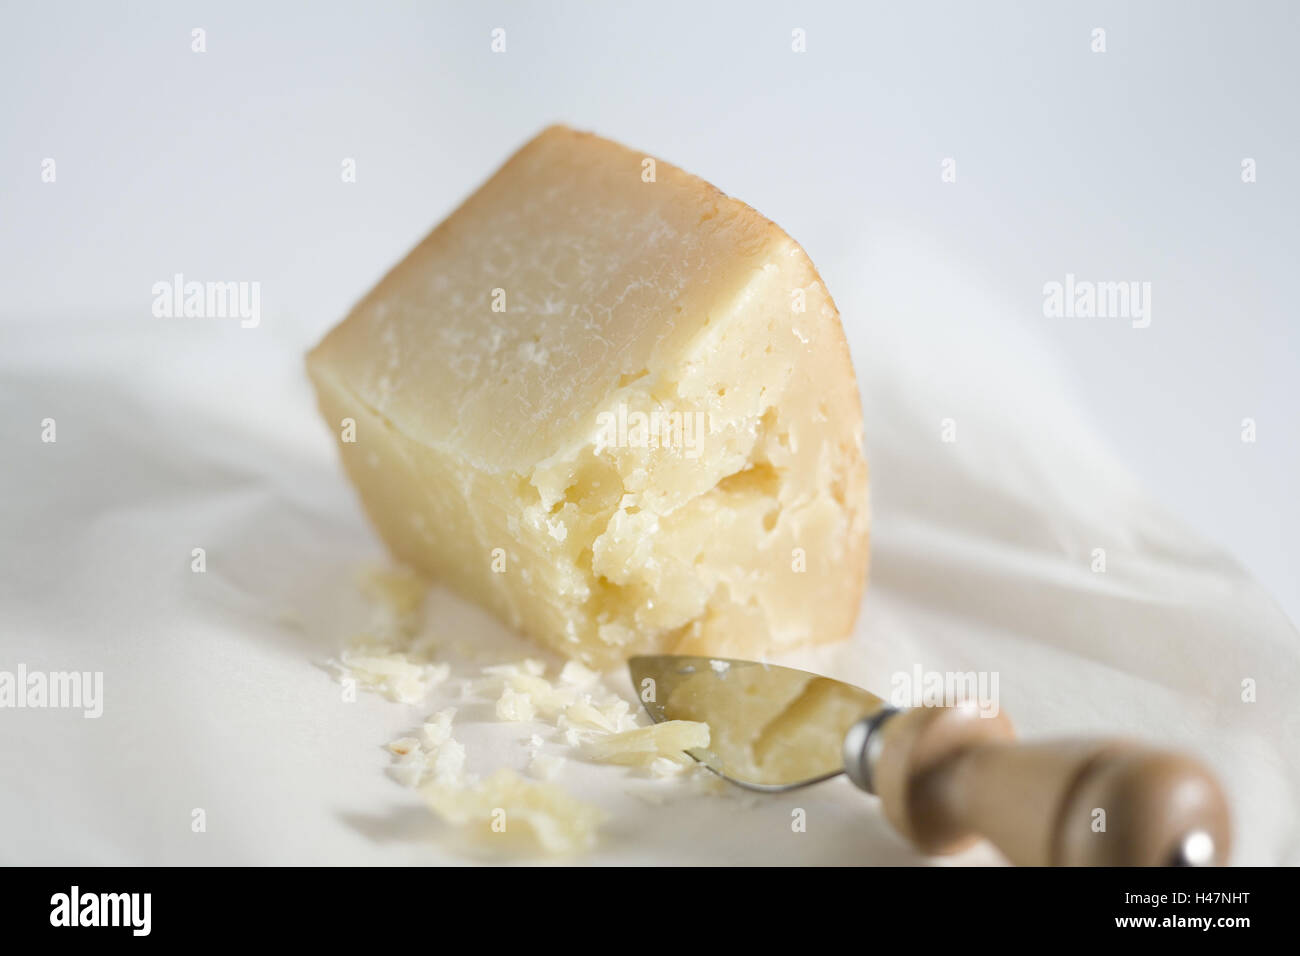 A piece parmesan cheese on paper, Stock Photo